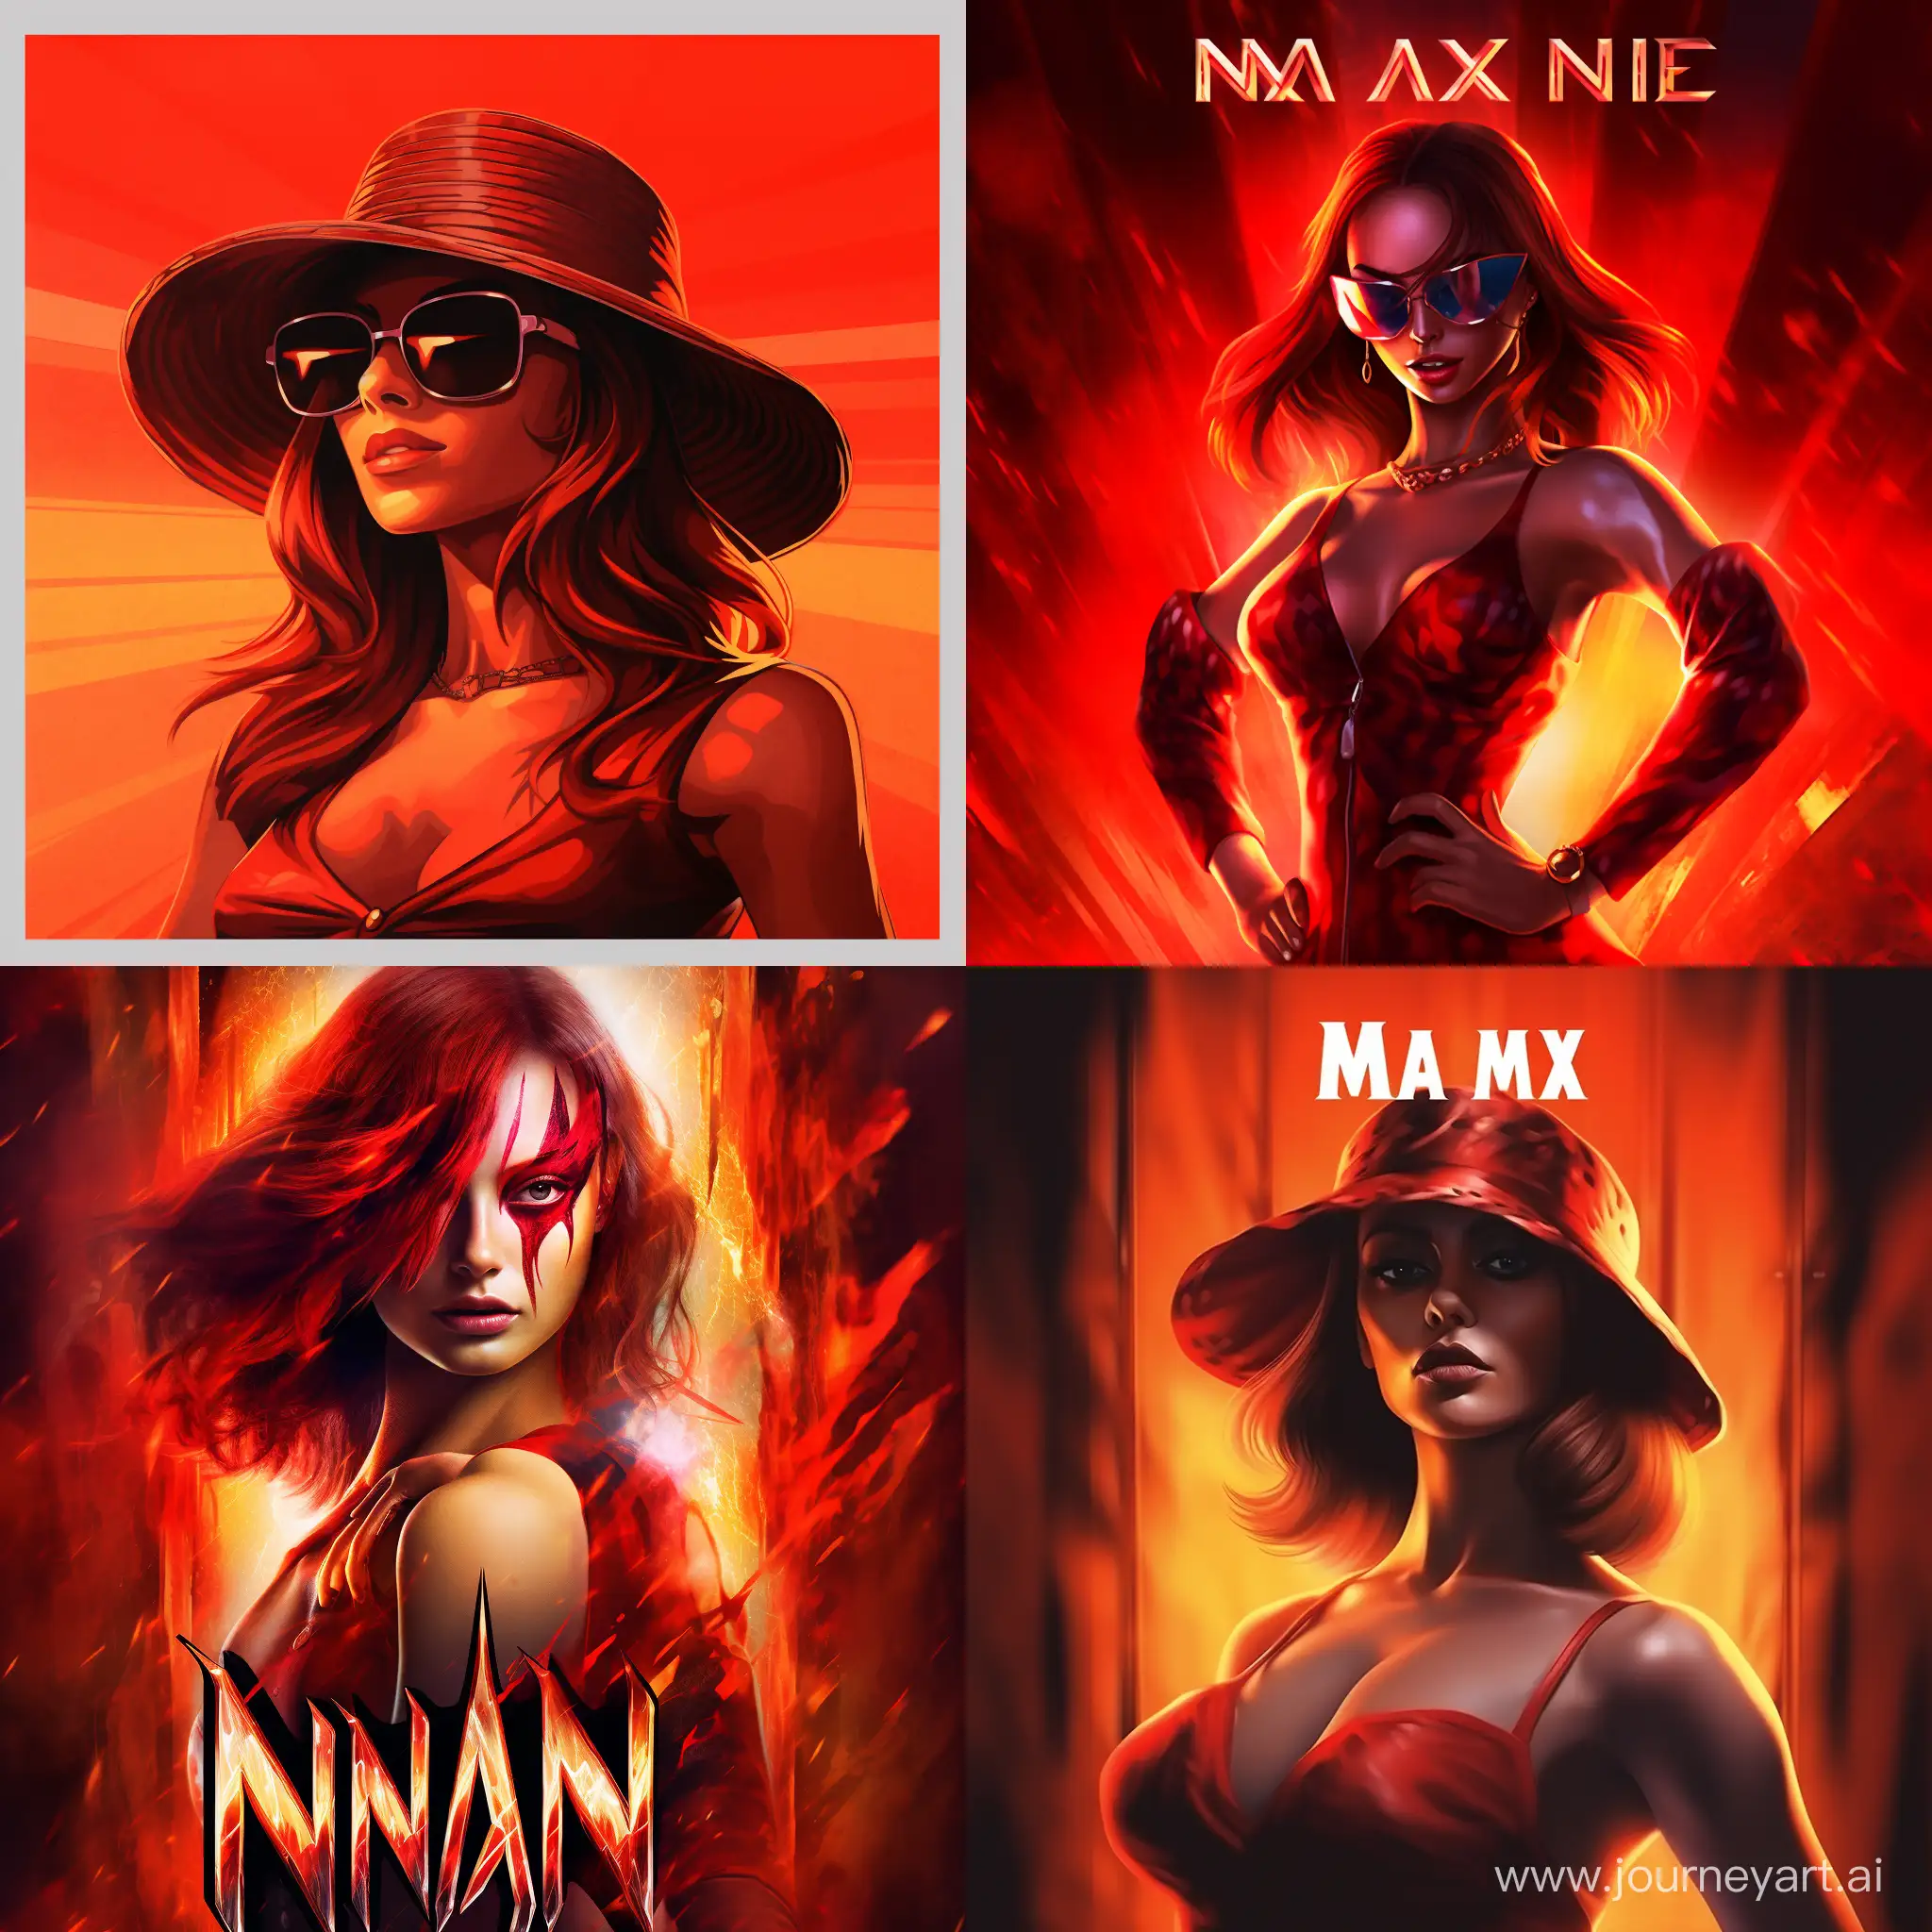 Nami-from-One-Piece-UltraRealistic-Poster-in-Red-Matrix-with-Daniela-Castana-and-Others